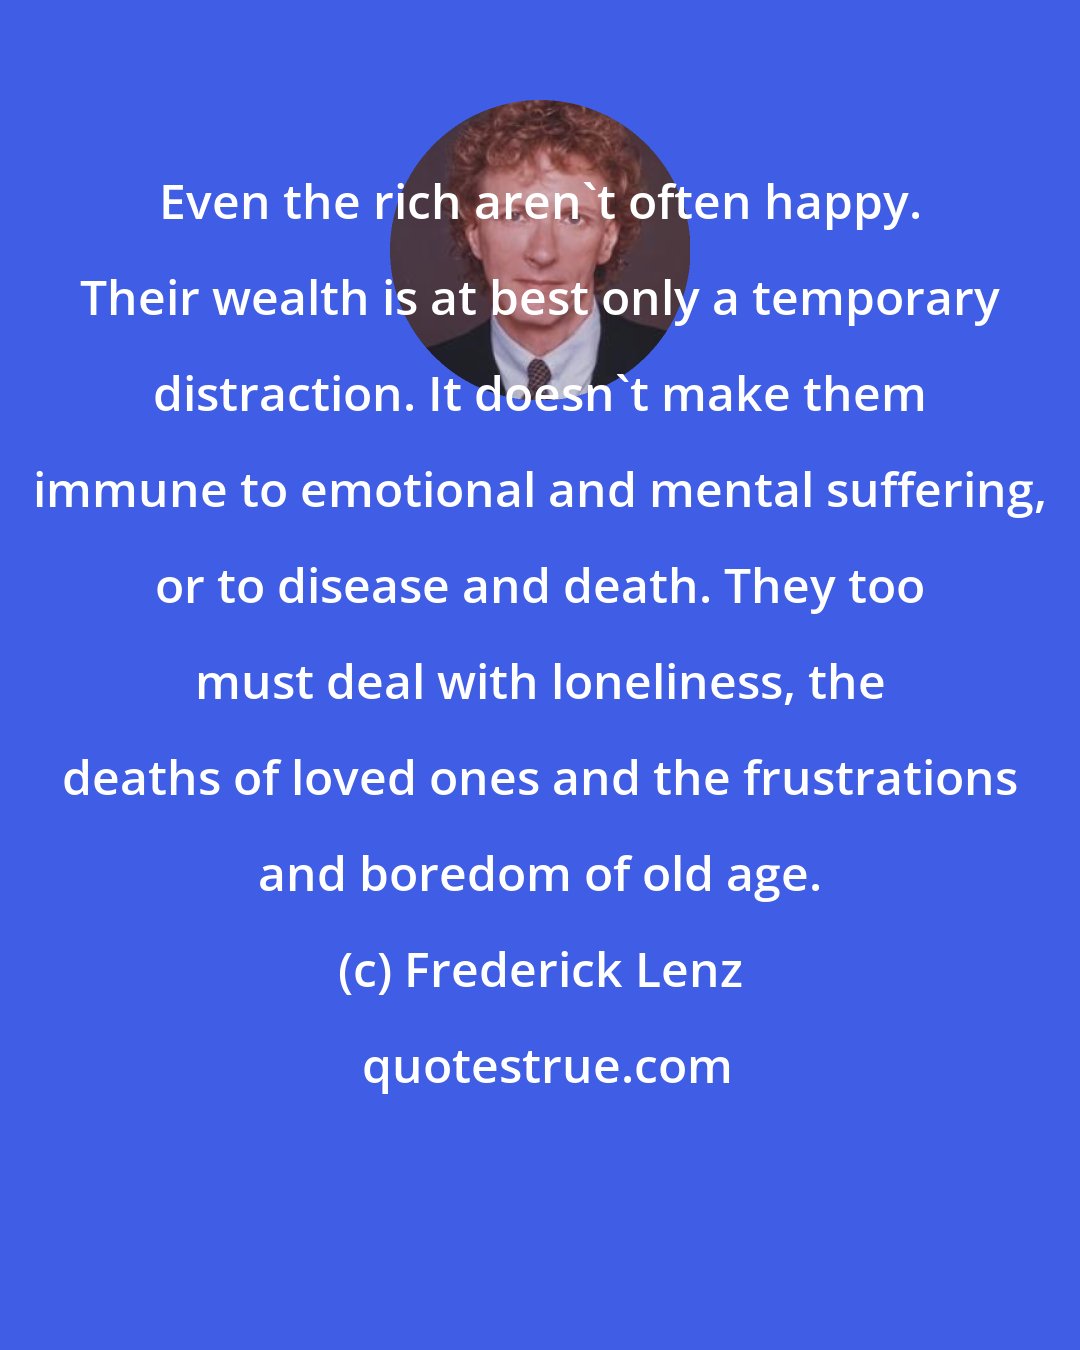 Frederick Lenz: Even the rich aren't often happy. Their wealth is at best only a temporary distraction. It doesn't make them immune to emotional and mental suffering, or to disease and death. They too must deal with loneliness, the deaths of loved ones and the frustrations and boredom of old age.